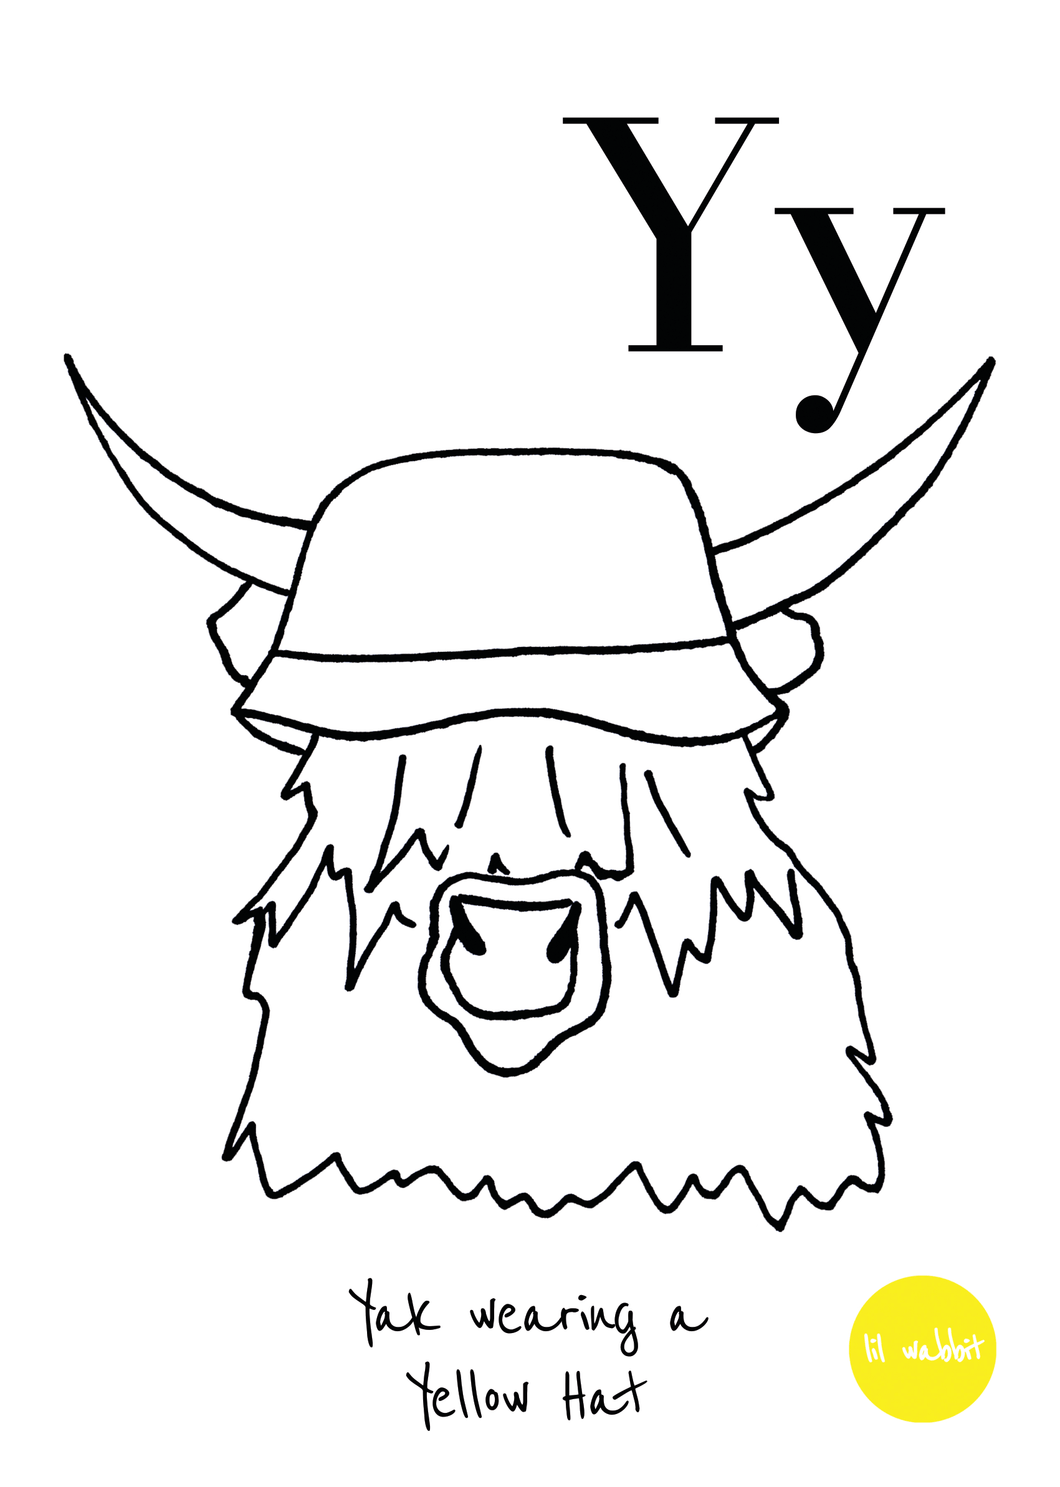 A black animal outline ready to colour in of a yak in a yellow hat